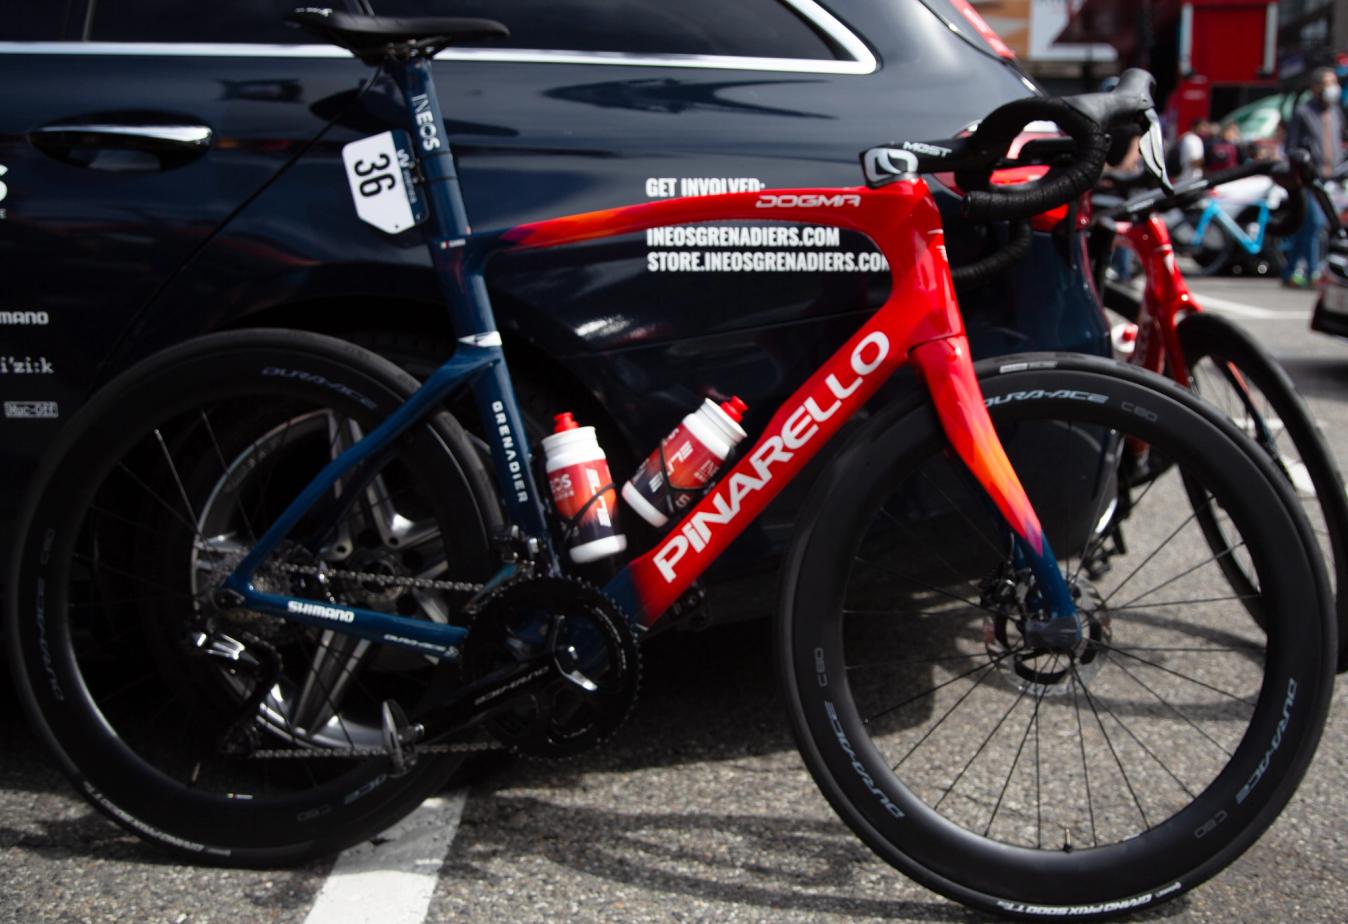 The Pinarello Dogma has retained its familiar shape over the years